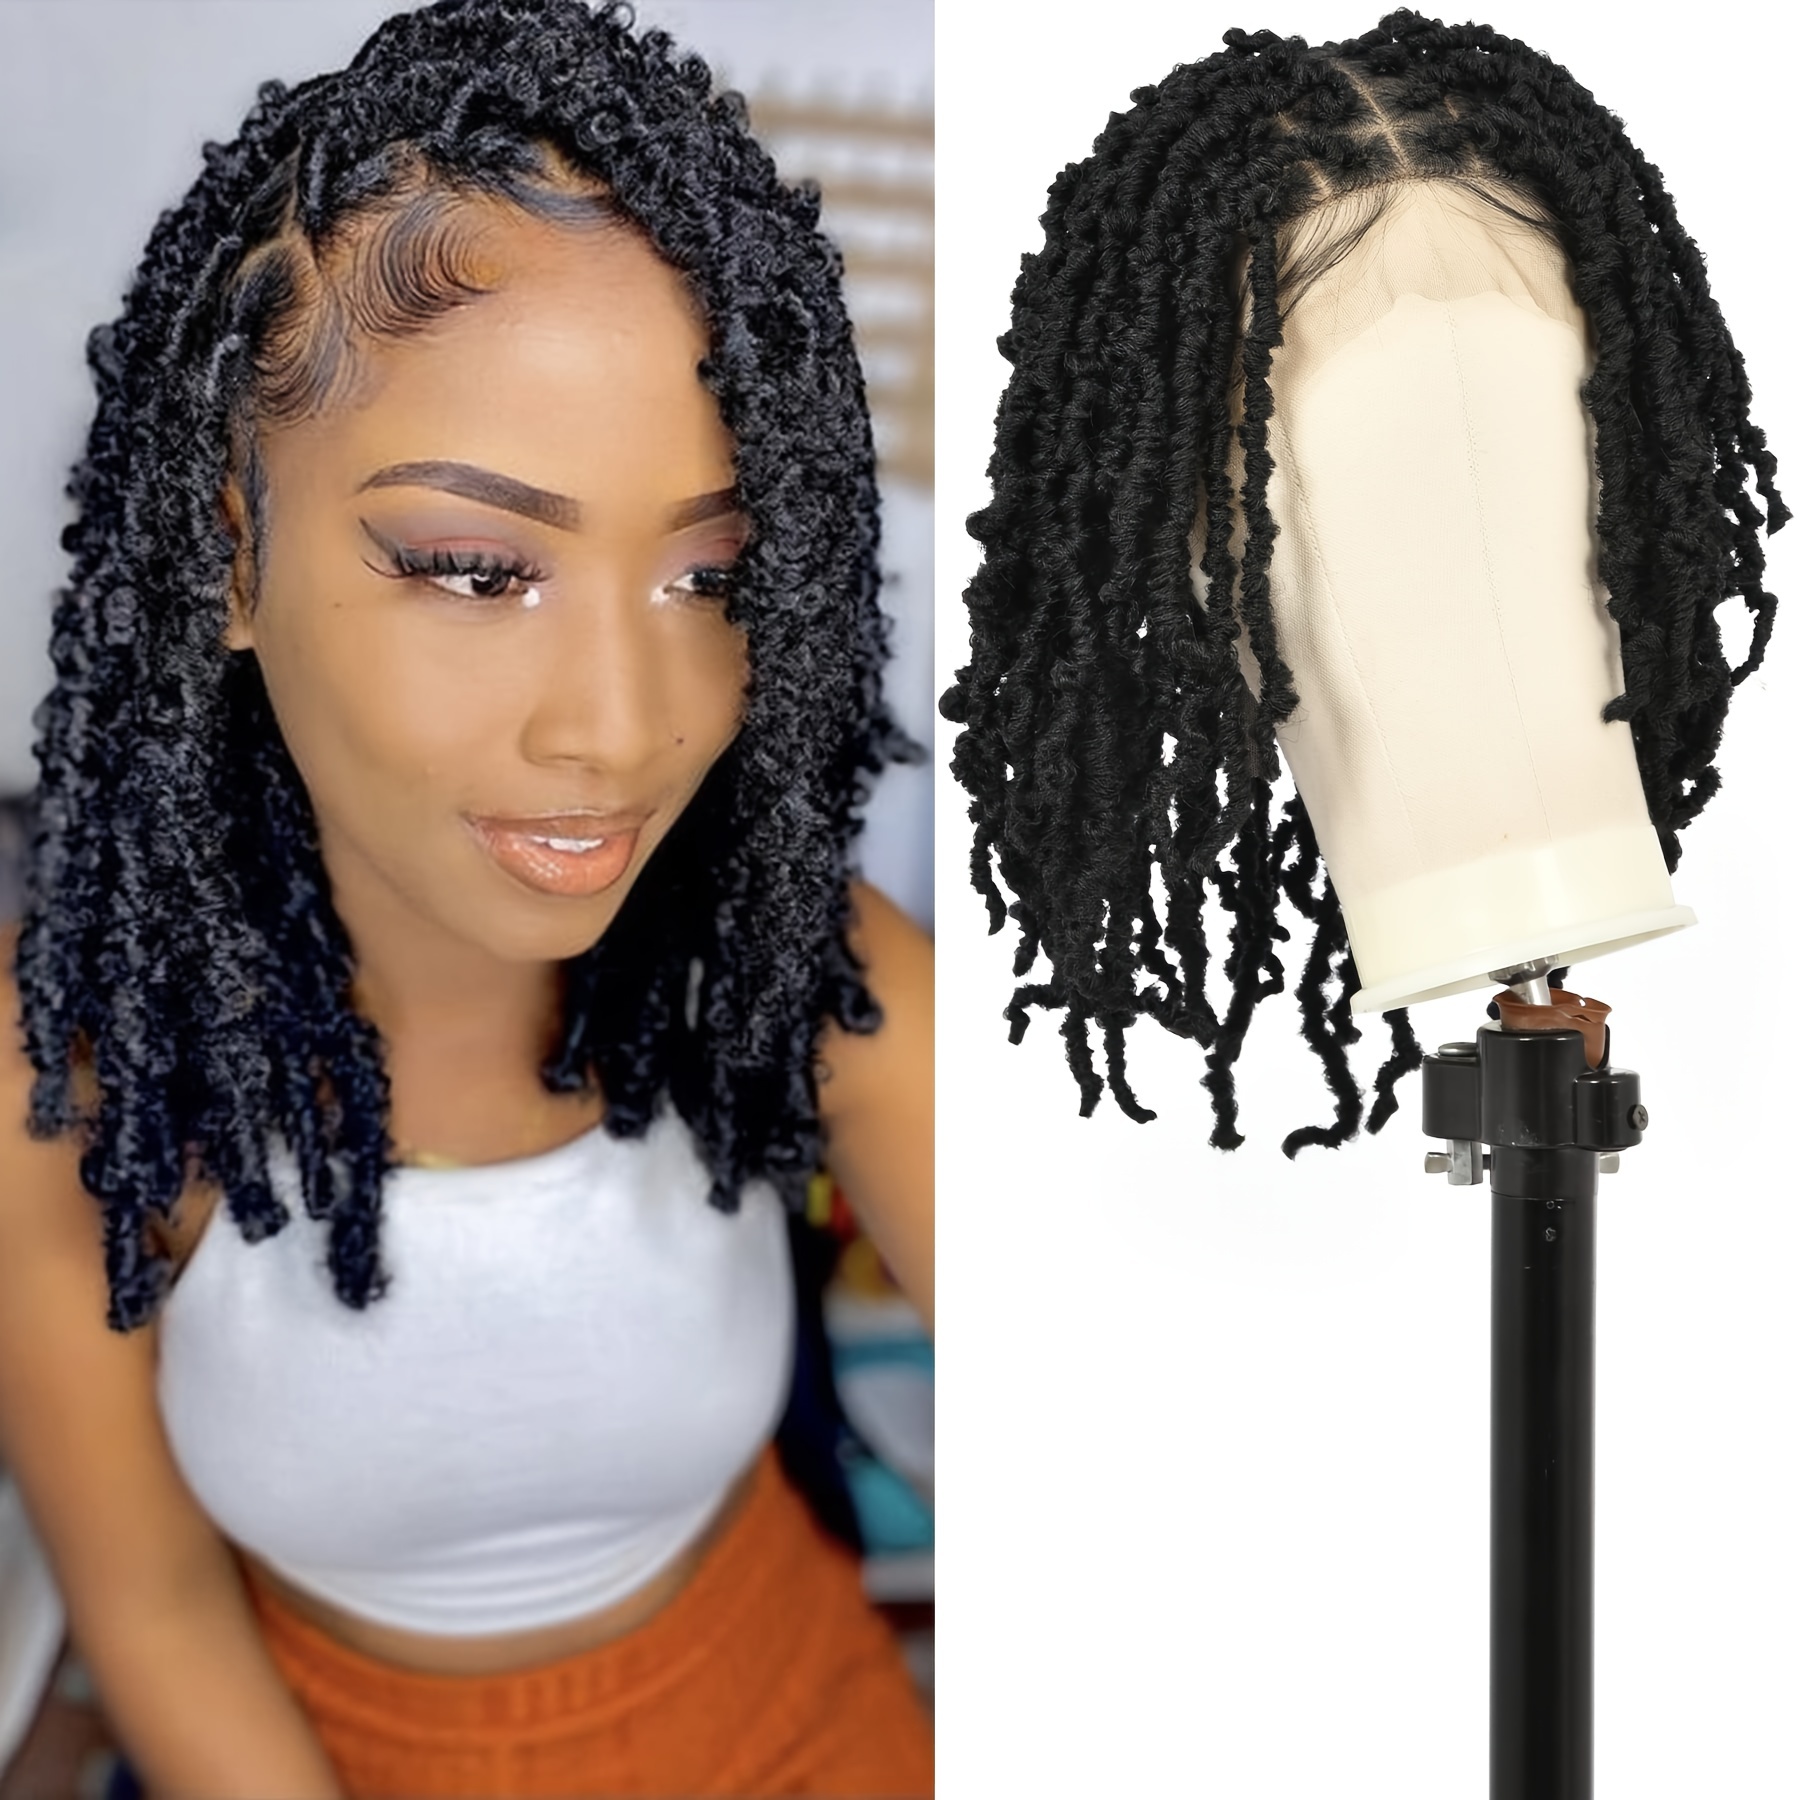 Twisted Braids Hair with Curly Ends Braided Wigs Short Black